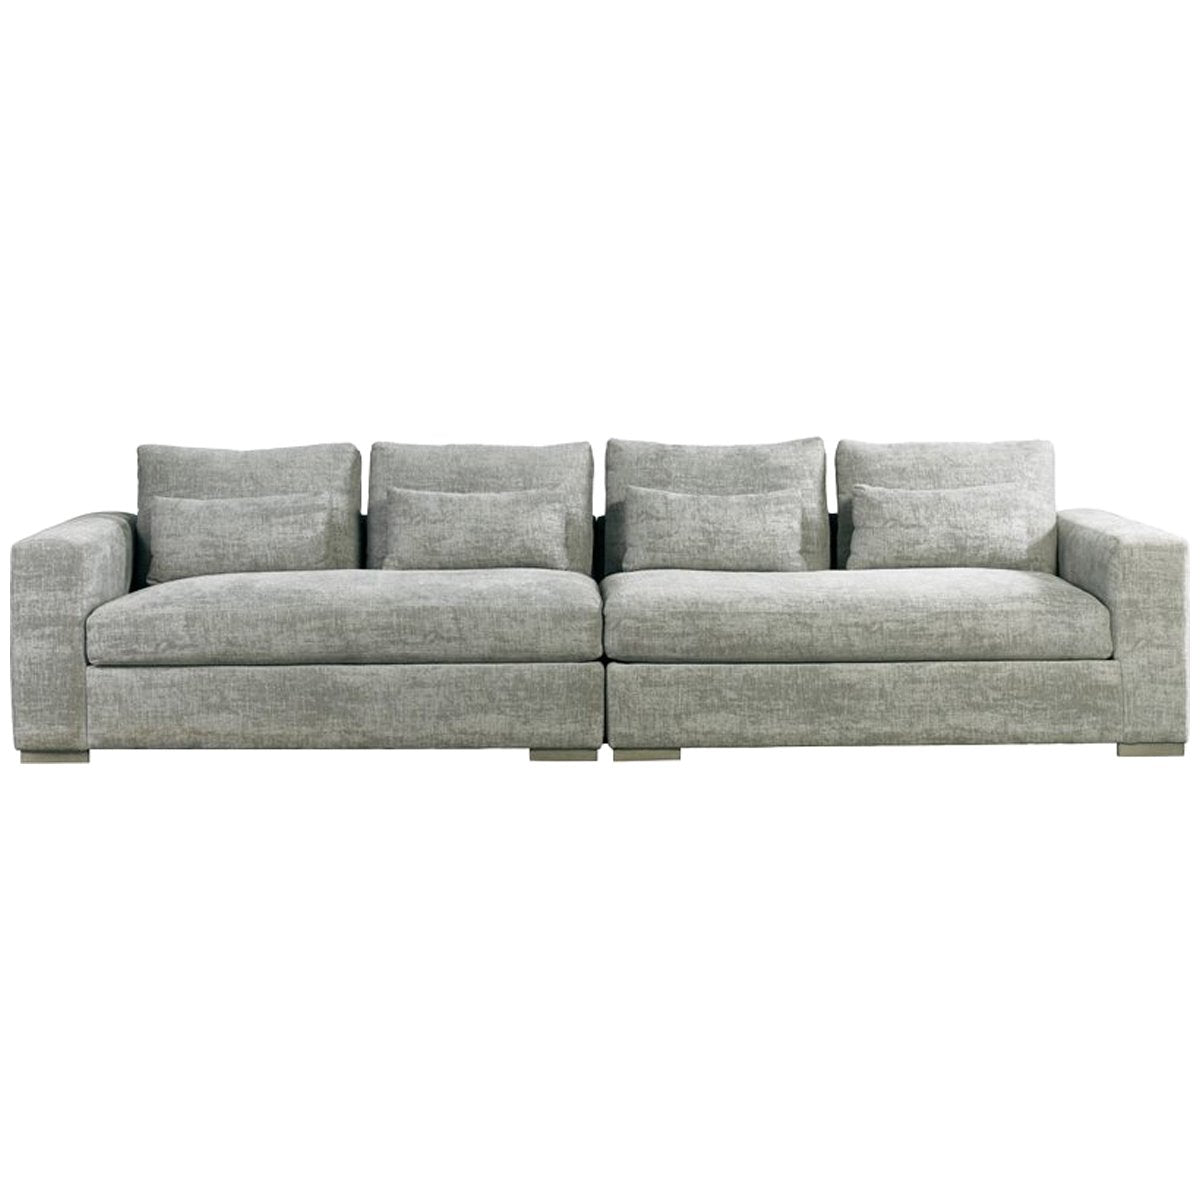 Lillian August Corso Two-Piece Sofa Sectional with Knife Edge Back